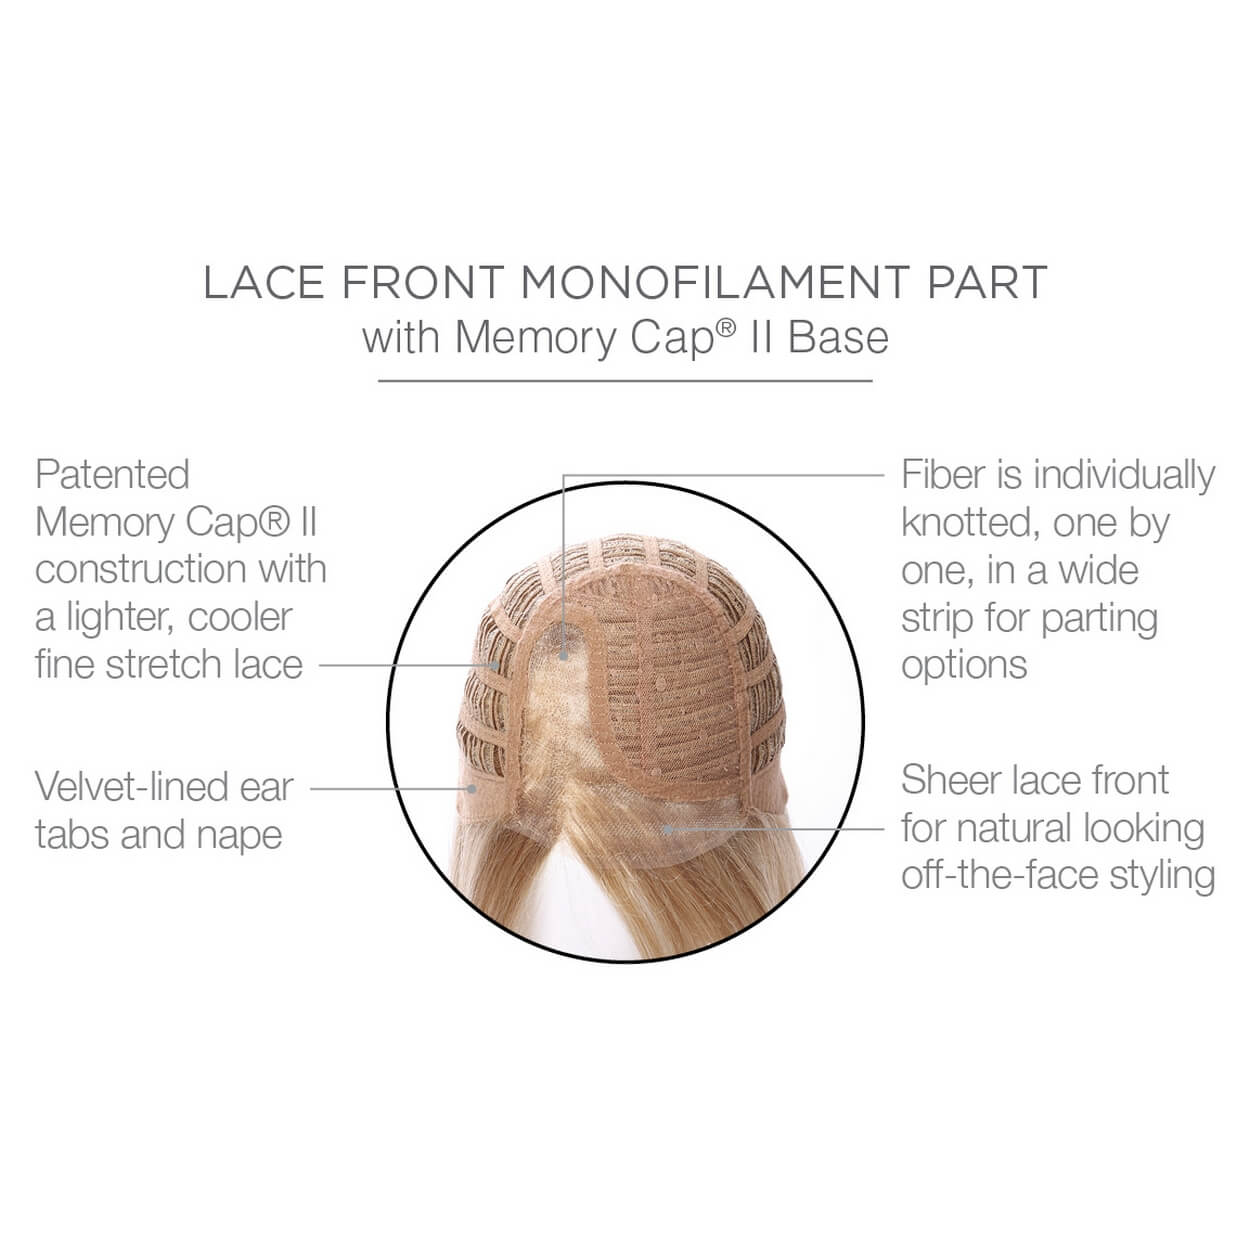 Lace front monofilament part with Memory Cap II Base